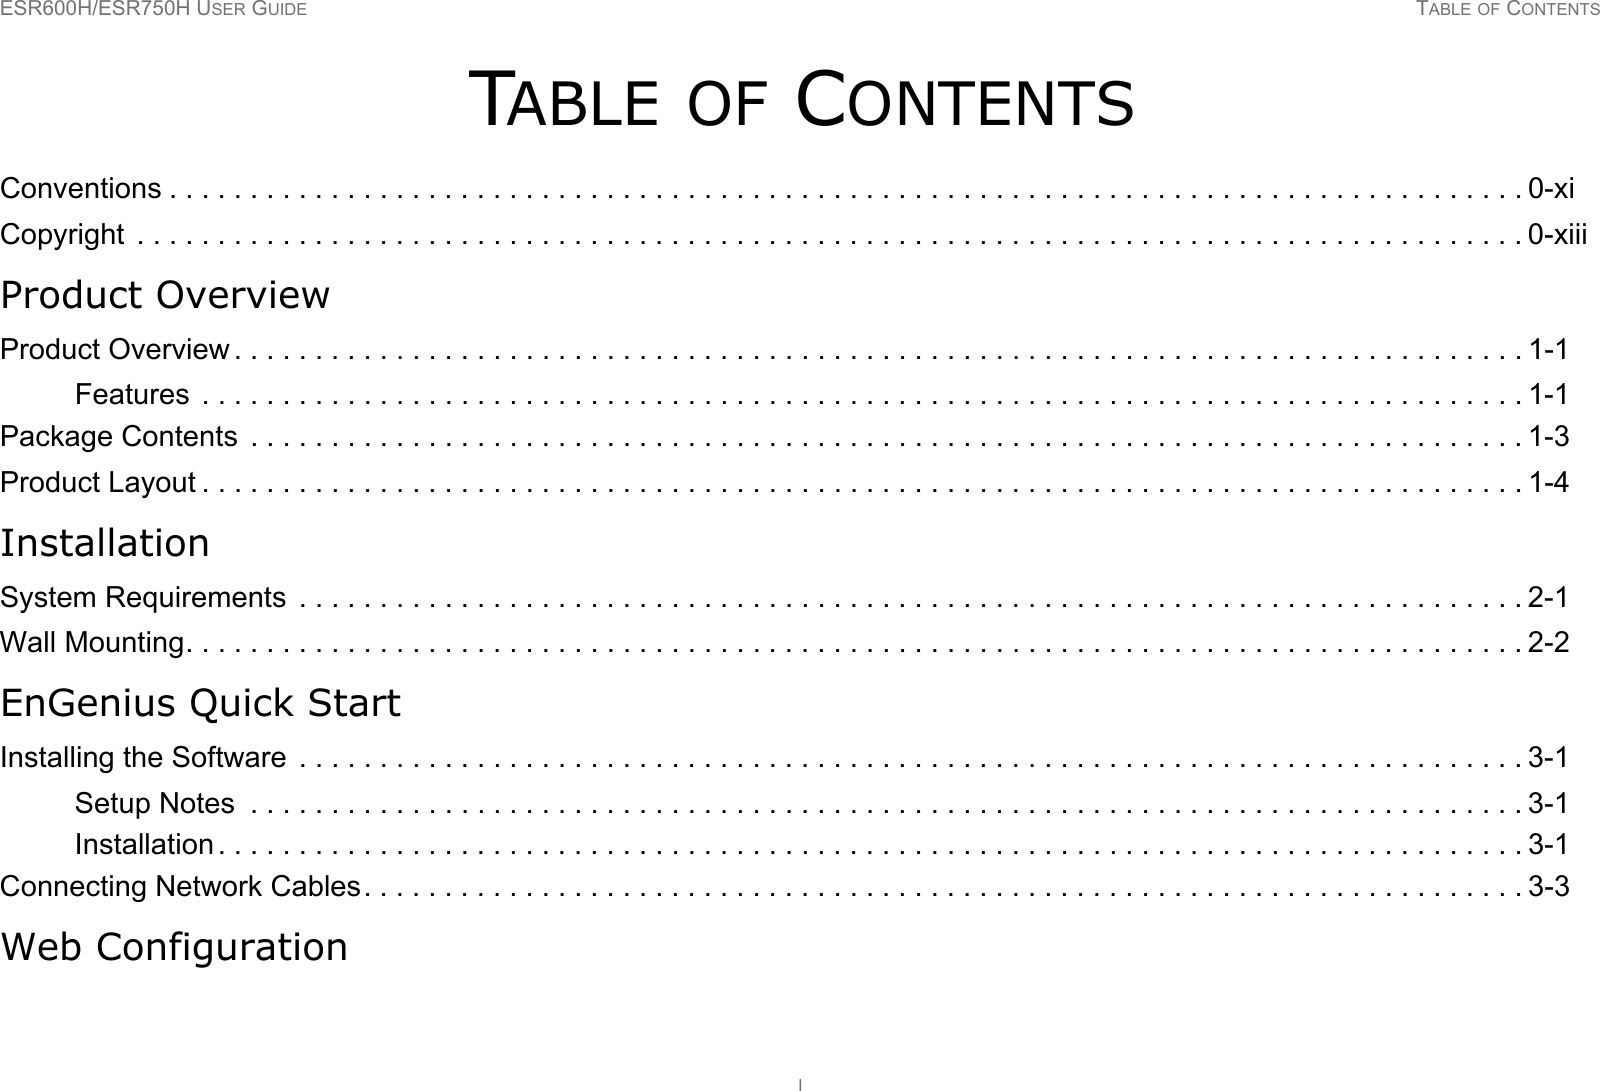 ESR600H/ESR750H USER GUIDE TABLE OF CONTENTSITABLE OF CONTENTSConventions . . . . . . . . . . . . . . . . . . . . . . . . . . . . . . . . . . . . . . . . . . . . . . . . . . . . . . . . . . . . . . . . . . . . . . . . . . . . . . . . . . . . 0-xiCopyright  . . . . . . . . . . . . . . . . . . . . . . . . . . . . . . . . . . . . . . . . . . . . . . . . . . . . . . . . . . . . . . . . . . . . . . . . . . . . . . . . . . . . . . 0-xiiiProduct OverviewProduct Overview . . . . . . . . . . . . . . . . . . . . . . . . . . . . . . . . . . . . . . . . . . . . . . . . . . . . . . . . . . . . . . . . . . . . . . . . . . . . . . . . 1-1Features  . . . . . . . . . . . . . . . . . . . . . . . . . . . . . . . . . . . . . . . . . . . . . . . . . . . . . . . . . . . . . . . . . . . . . . . . . . . . . . . . . . 1-1Package Contents  . . . . . . . . . . . . . . . . . . . . . . . . . . . . . . . . . . . . . . . . . . . . . . . . . . . . . . . . . . . . . . . . . . . . . . . . . . . . . . . 1-3Product Layout . . . . . . . . . . . . . . . . . . . . . . . . . . . . . . . . . . . . . . . . . . . . . . . . . . . . . . . . . . . . . . . . . . . . . . . . . . . . . . . . . . 1-4InstallationSystem Requirements  . . . . . . . . . . . . . . . . . . . . . . . . . . . . . . . . . . . . . . . . . . . . . . . . . . . . . . . . . . . . . . . . . . . . . . . . . . . . 2-1Wall Mounting. . . . . . . . . . . . . . . . . . . . . . . . . . . . . . . . . . . . . . . . . . . . . . . . . . . . . . . . . . . . . . . . . . . . . . . . . . . . . . . . . . . 2-2EnGenius Quick StartInstalling the Software  . . . . . . . . . . . . . . . . . . . . . . . . . . . . . . . . . . . . . . . . . . . . . . . . . . . . . . . . . . . . . . . . . . . . . . . . . . . . 3-1Setup Notes  . . . . . . . . . . . . . . . . . . . . . . . . . . . . . . . . . . . . . . . . . . . . . . . . . . . . . . . . . . . . . . . . . . . . . . . . . . . . . . . 3-1Installation . . . . . . . . . . . . . . . . . . . . . . . . . . . . . . . . . . . . . . . . . . . . . . . . . . . . . . . . . . . . . . . . . . . . . . . . . . . . . . . . . 3-1Connecting Network Cables. . . . . . . . . . . . . . . . . . . . . . . . . . . . . . . . . . . . . . . . . . . . . . . . . . . . . . . . . . . . . . . . . . . . . . . . 3-3Web Configuration